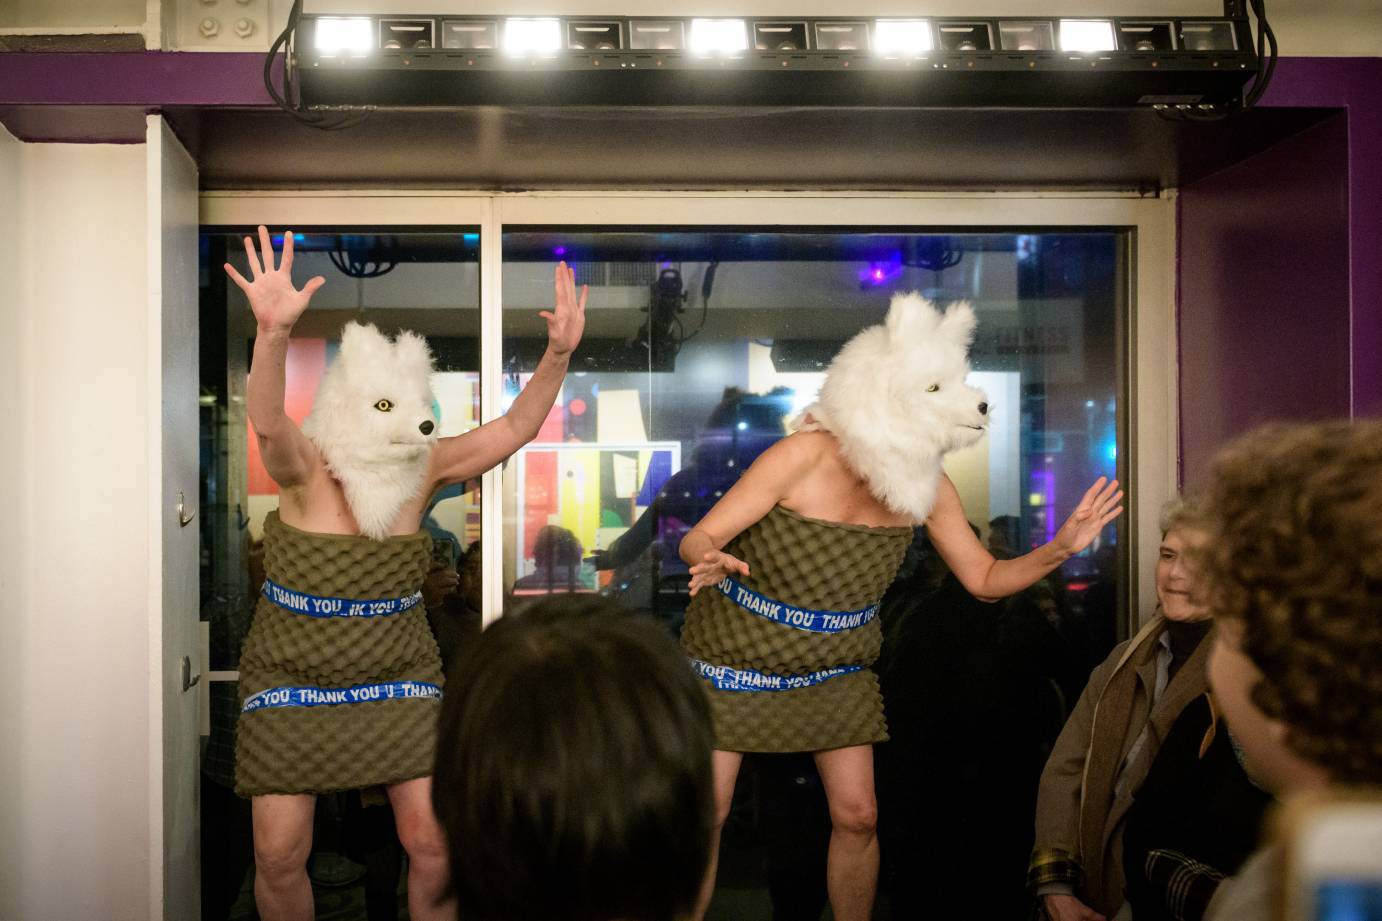 Two women in wolf heads get the crowd going in a theater lobby